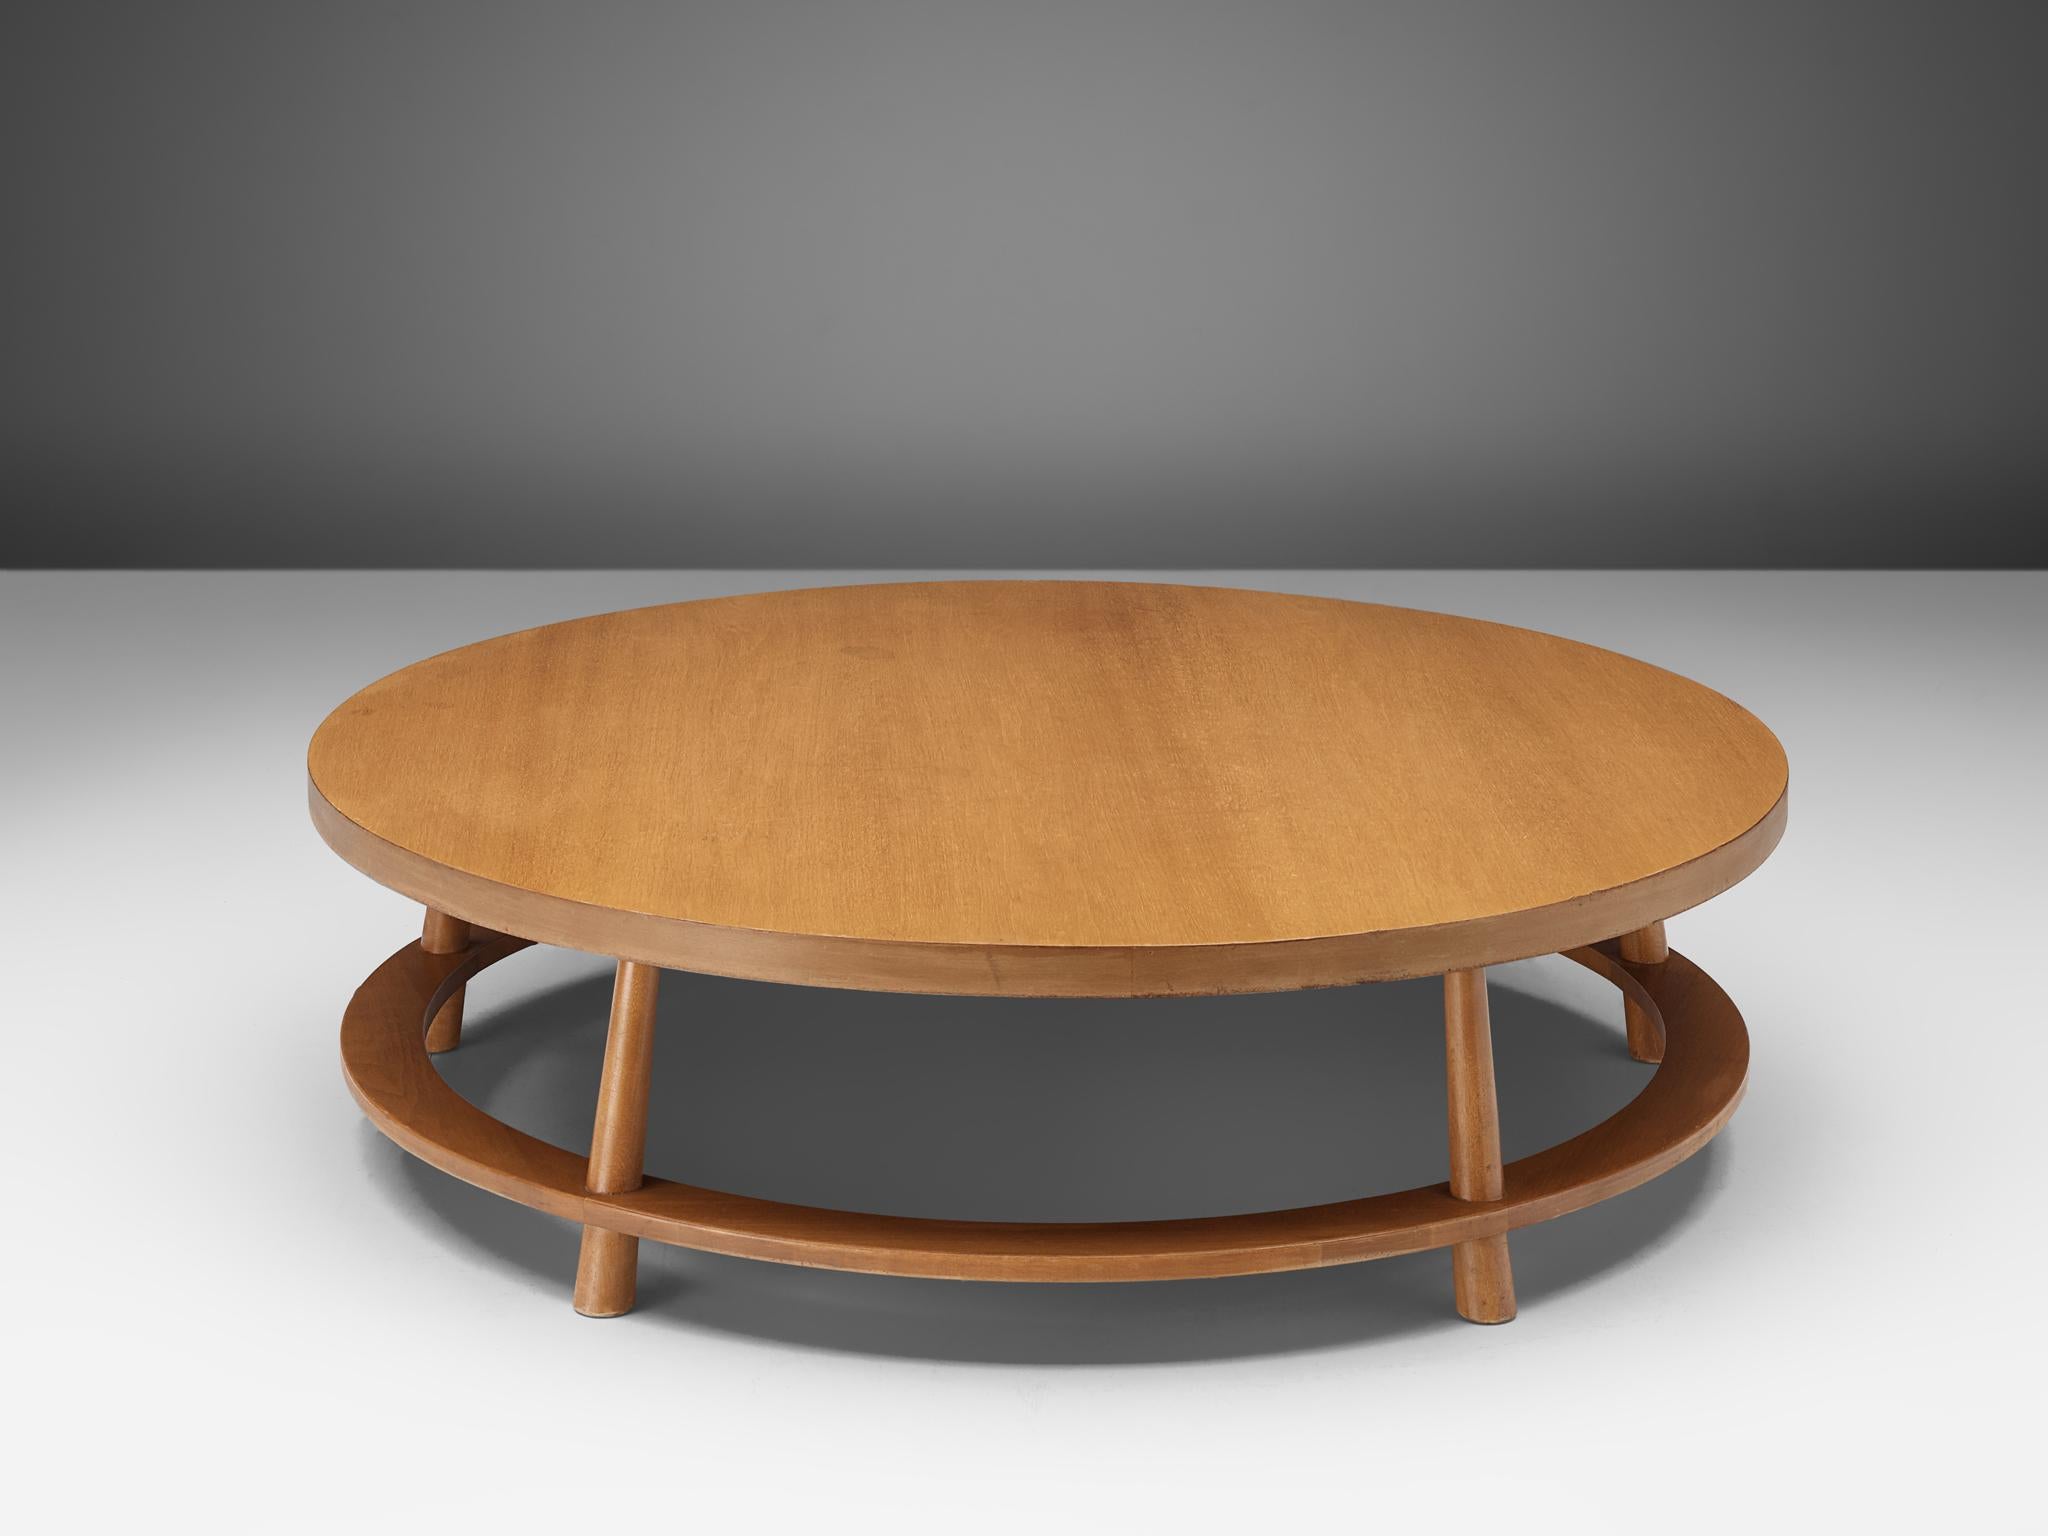 Robsjohn-Gibbings for Widdicomb, coffee table '48', walnut, United States, 1948.

This round coffee table is designed by Robsjohn-Gibbings for Widdicomb in 1948. The table features a solid walnut frame and a walnut top. It stands on five conical